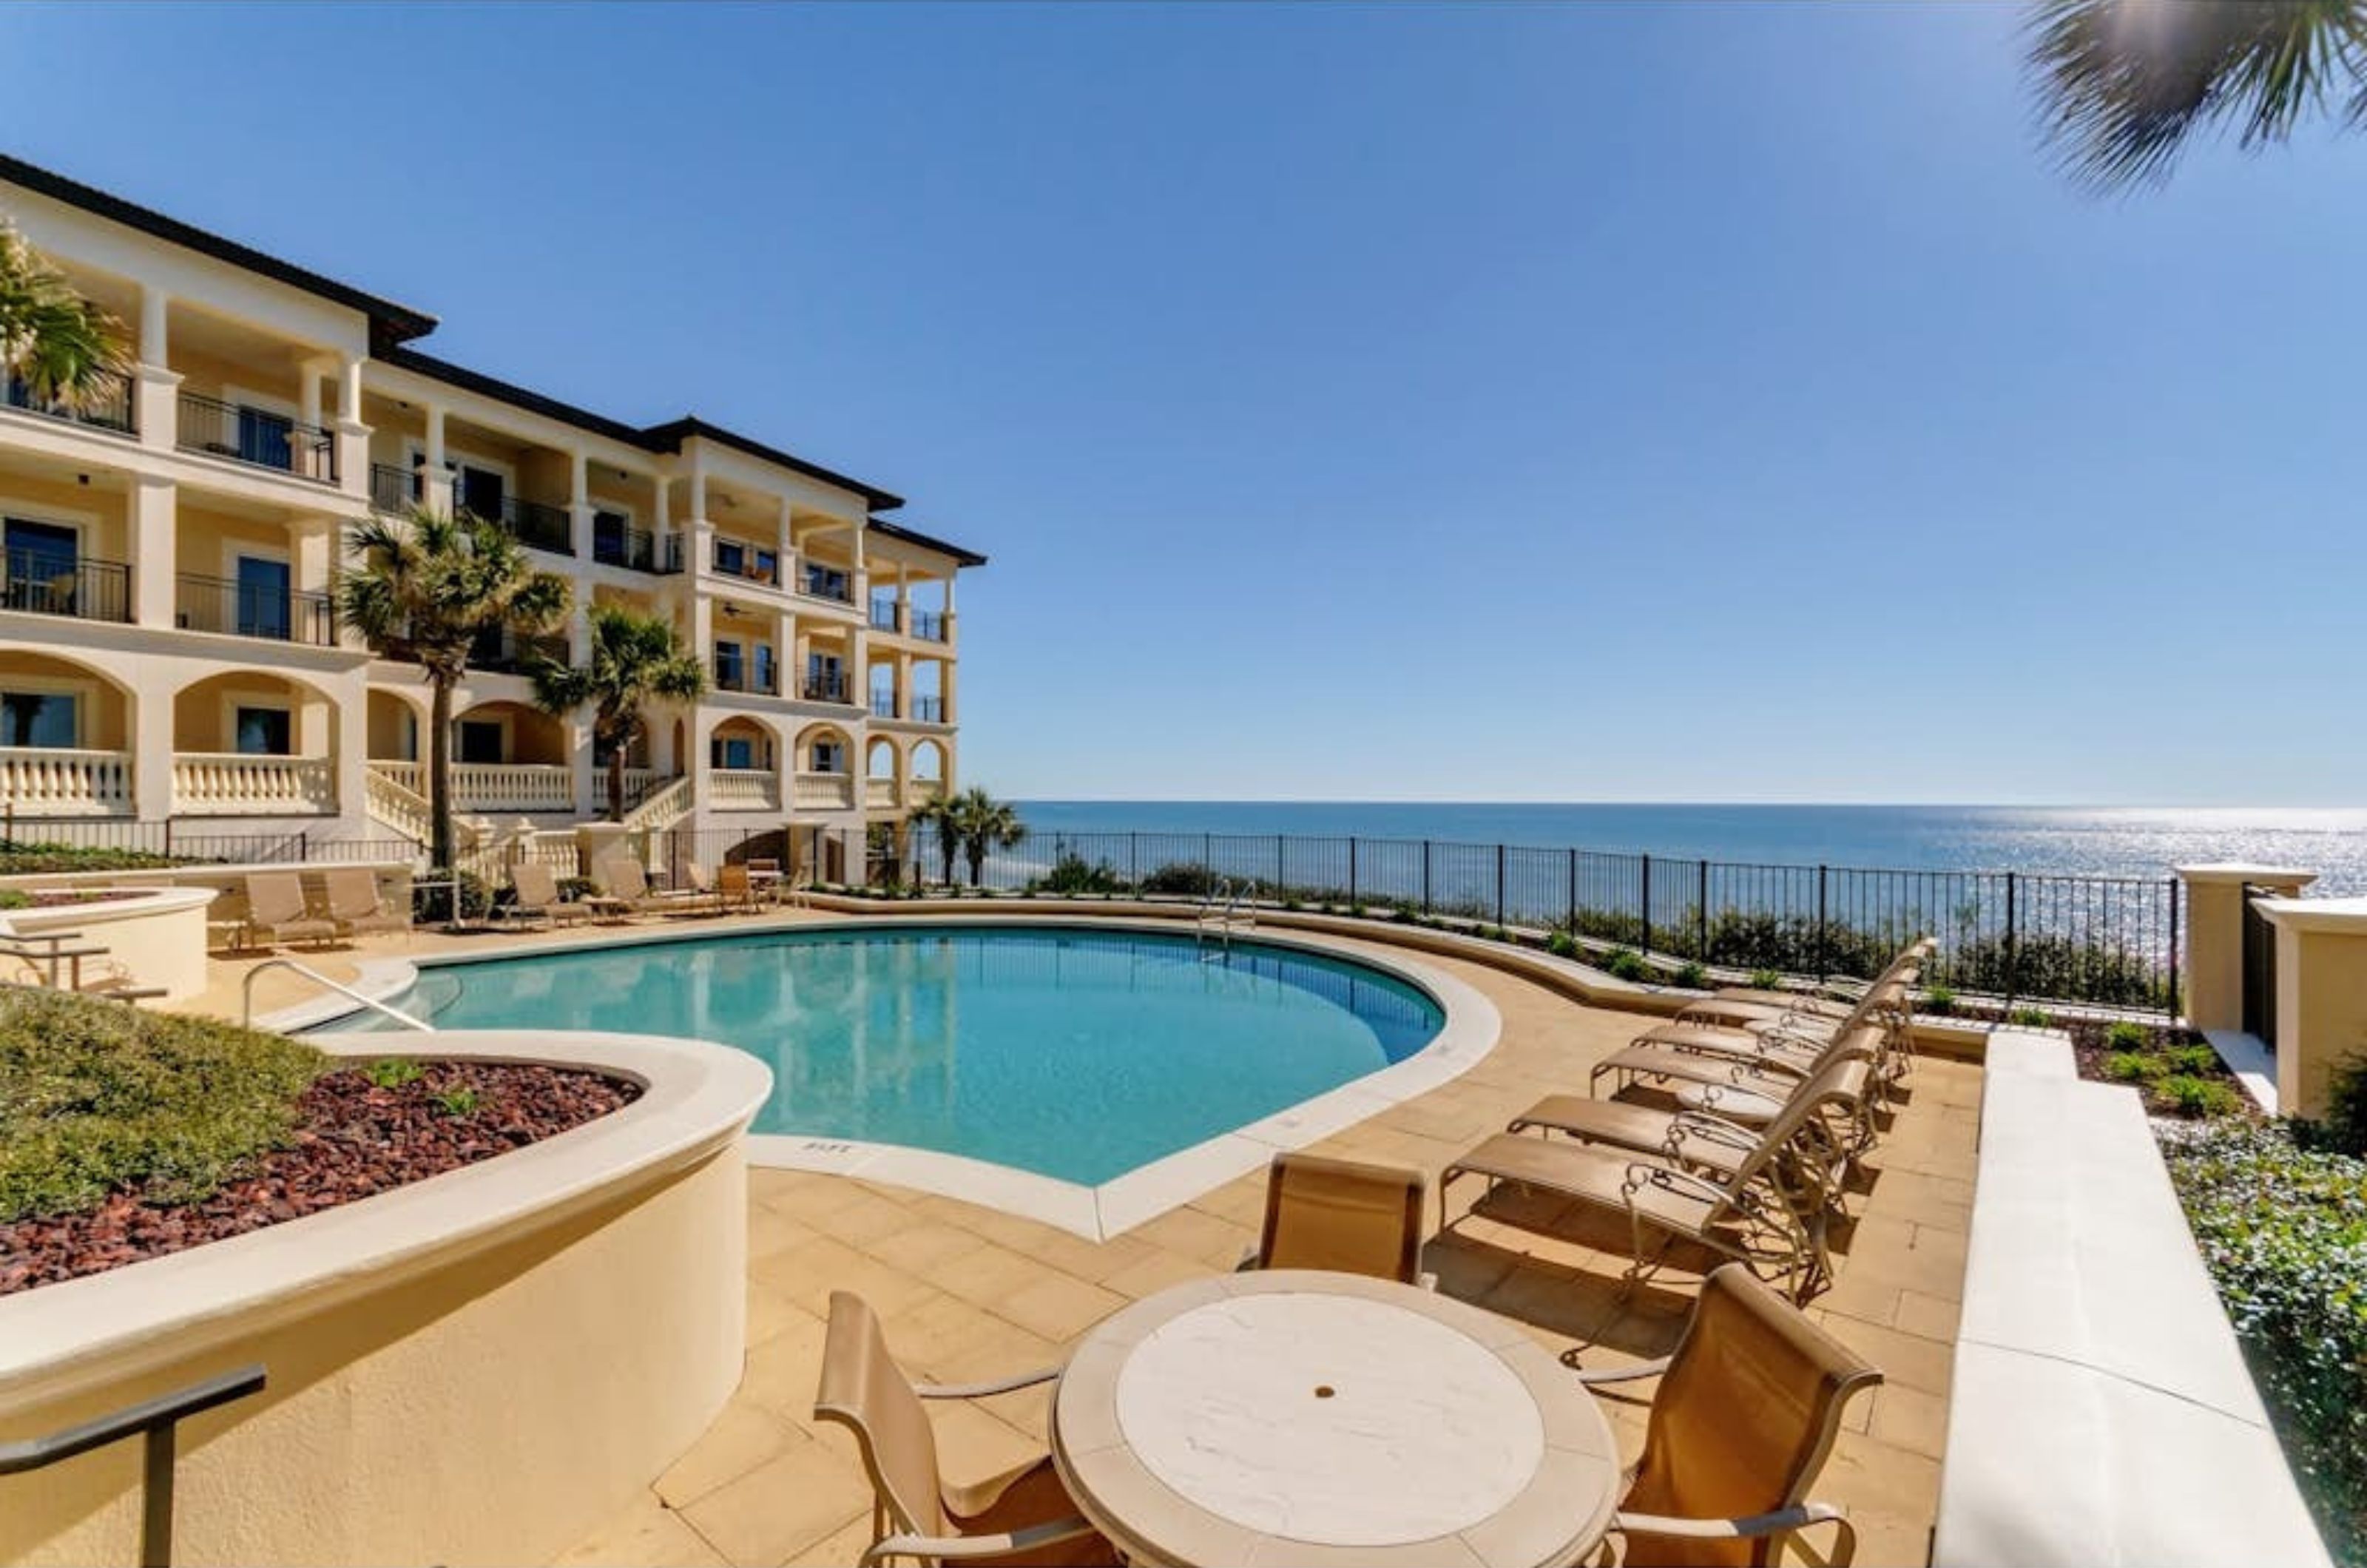 An outdoor pool and pool deck overlooking the Gulf at Bella Vita in Santa Rosa Beach Florida 